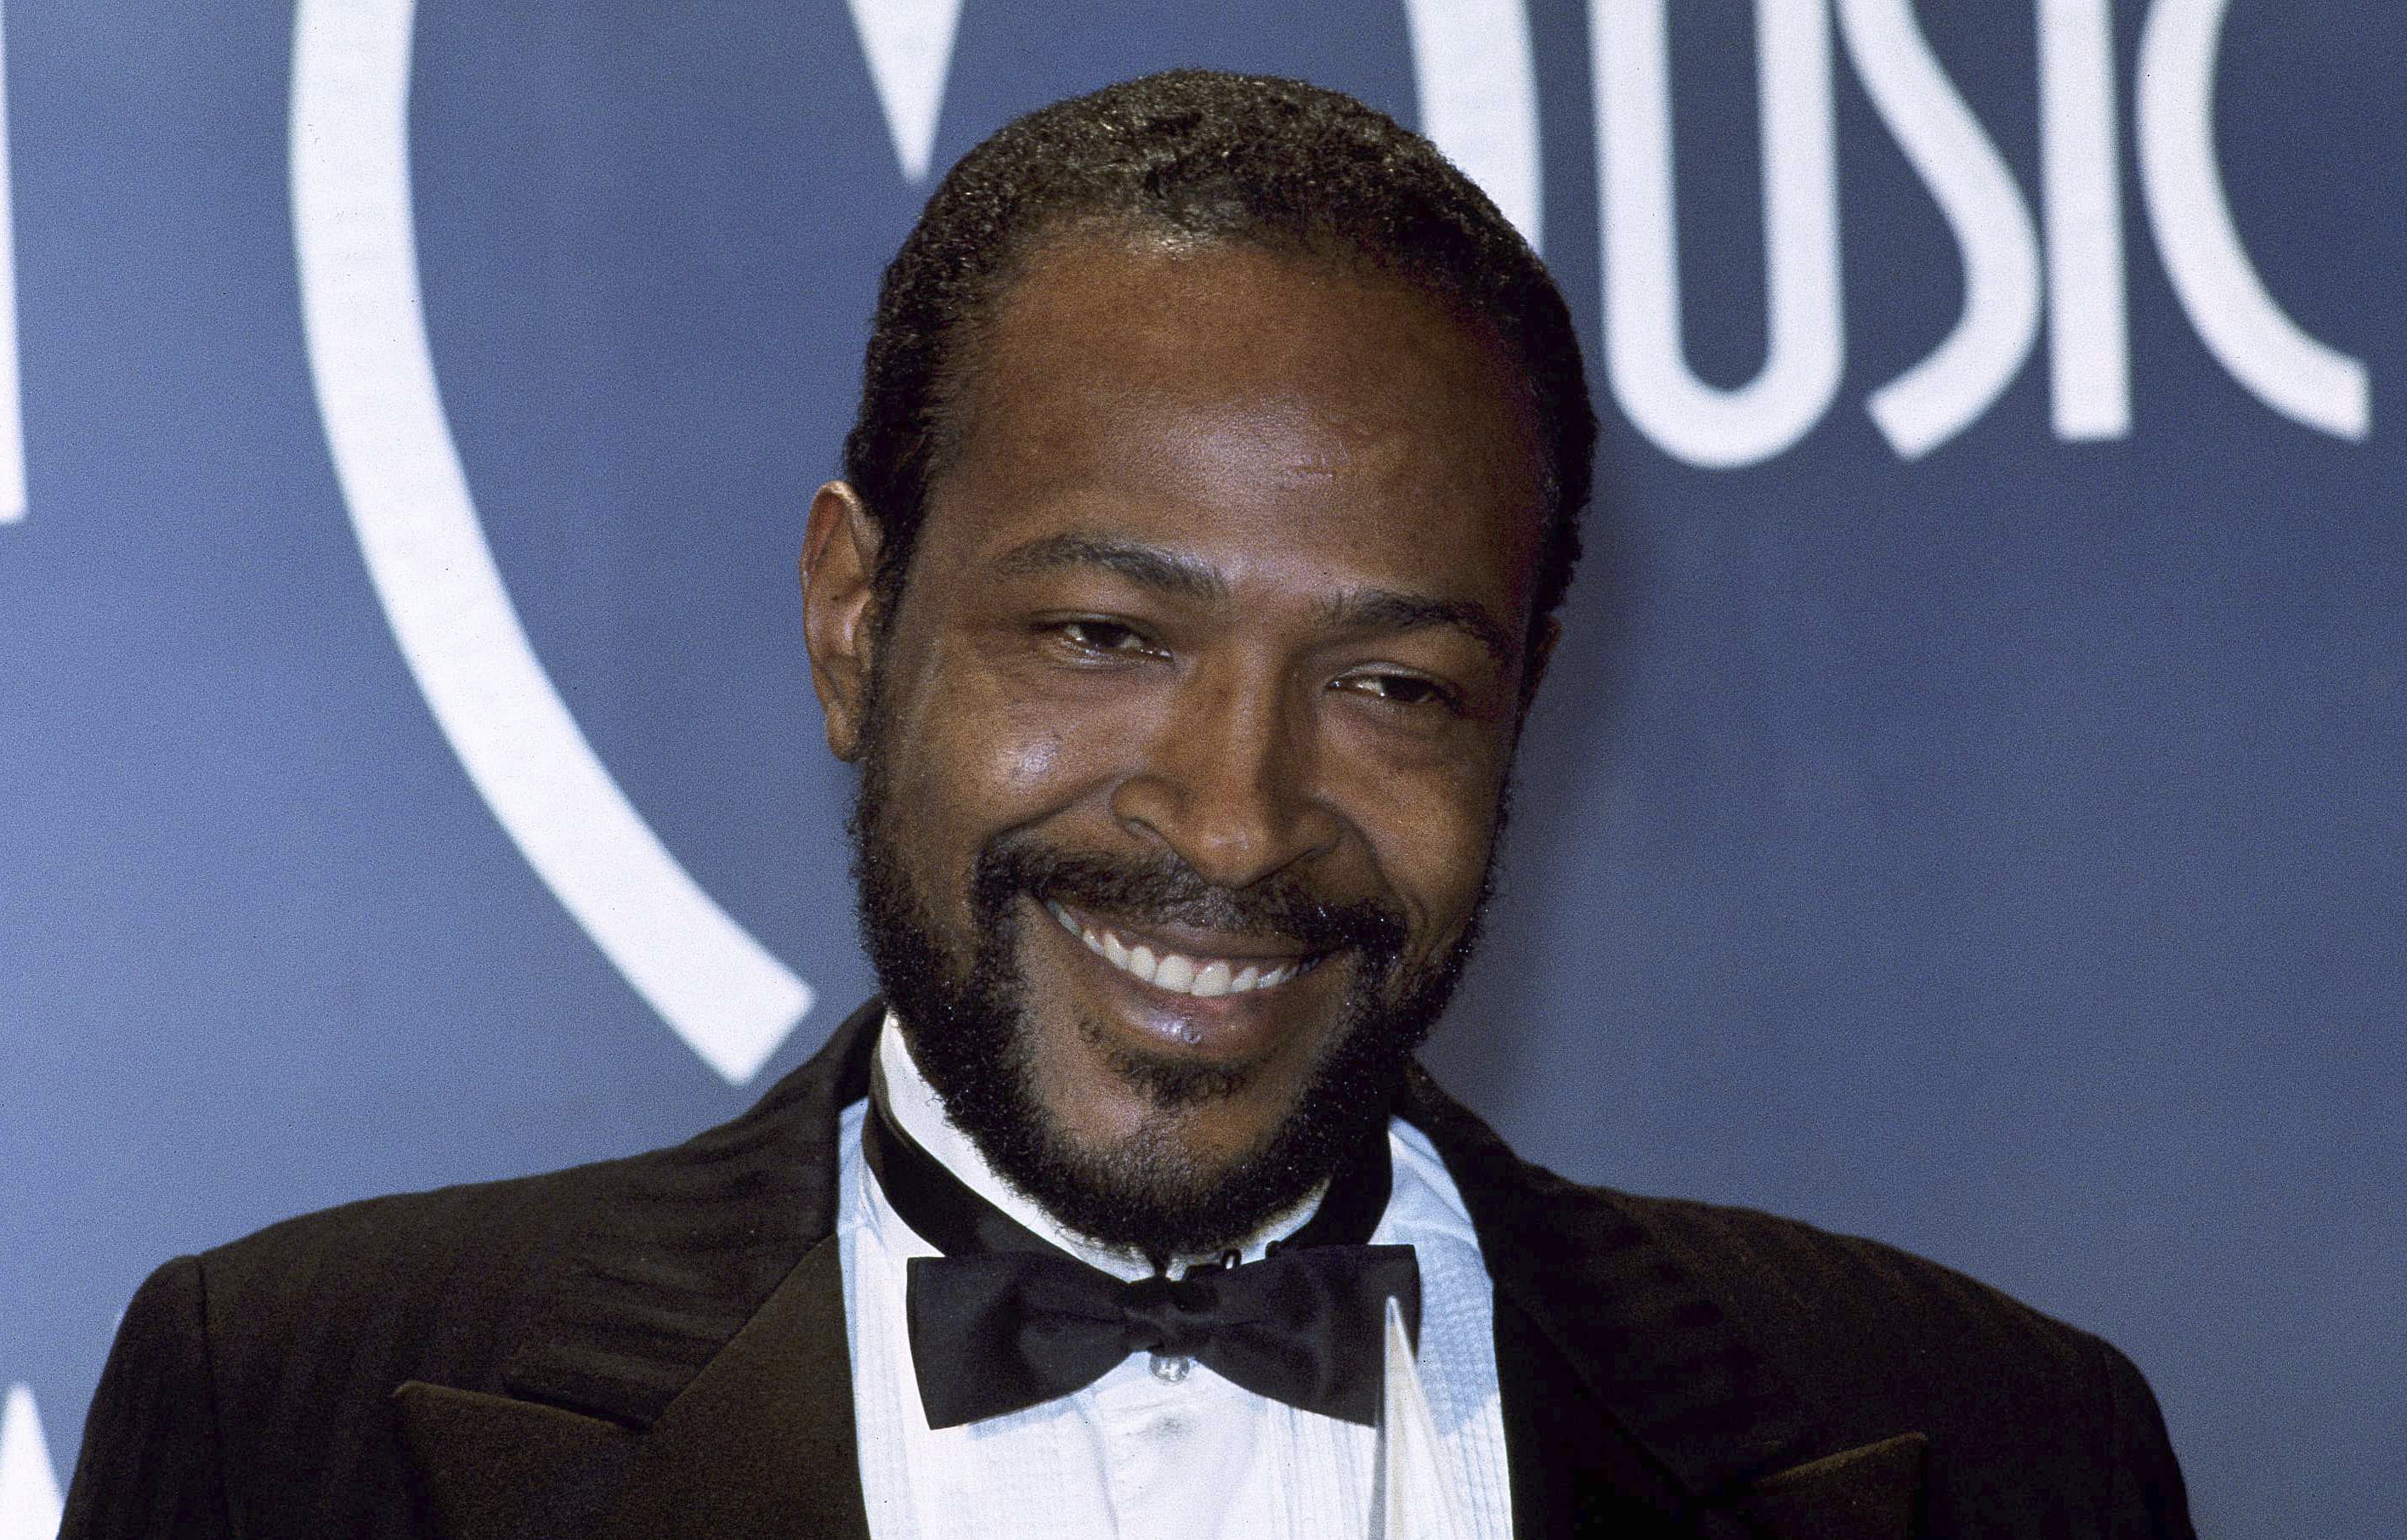 FILE - In this Jan. 17, 1983, file photo, singer-songwriter Marvin Gaye, winner of Favorite Soul/R&amp;B Single, "Sexual Healing," attends the American Music Awards in Los Angeles. Clothing, including a knit cap and military-style jacket and pants, worn by Gaye will go on display at the Motown Museum in Detroit as part of the music label's 60th anniversary celebration. Pictures of the items will be posted on Facebook Friday and displayed at the museum beginning Saturday through the end of April.